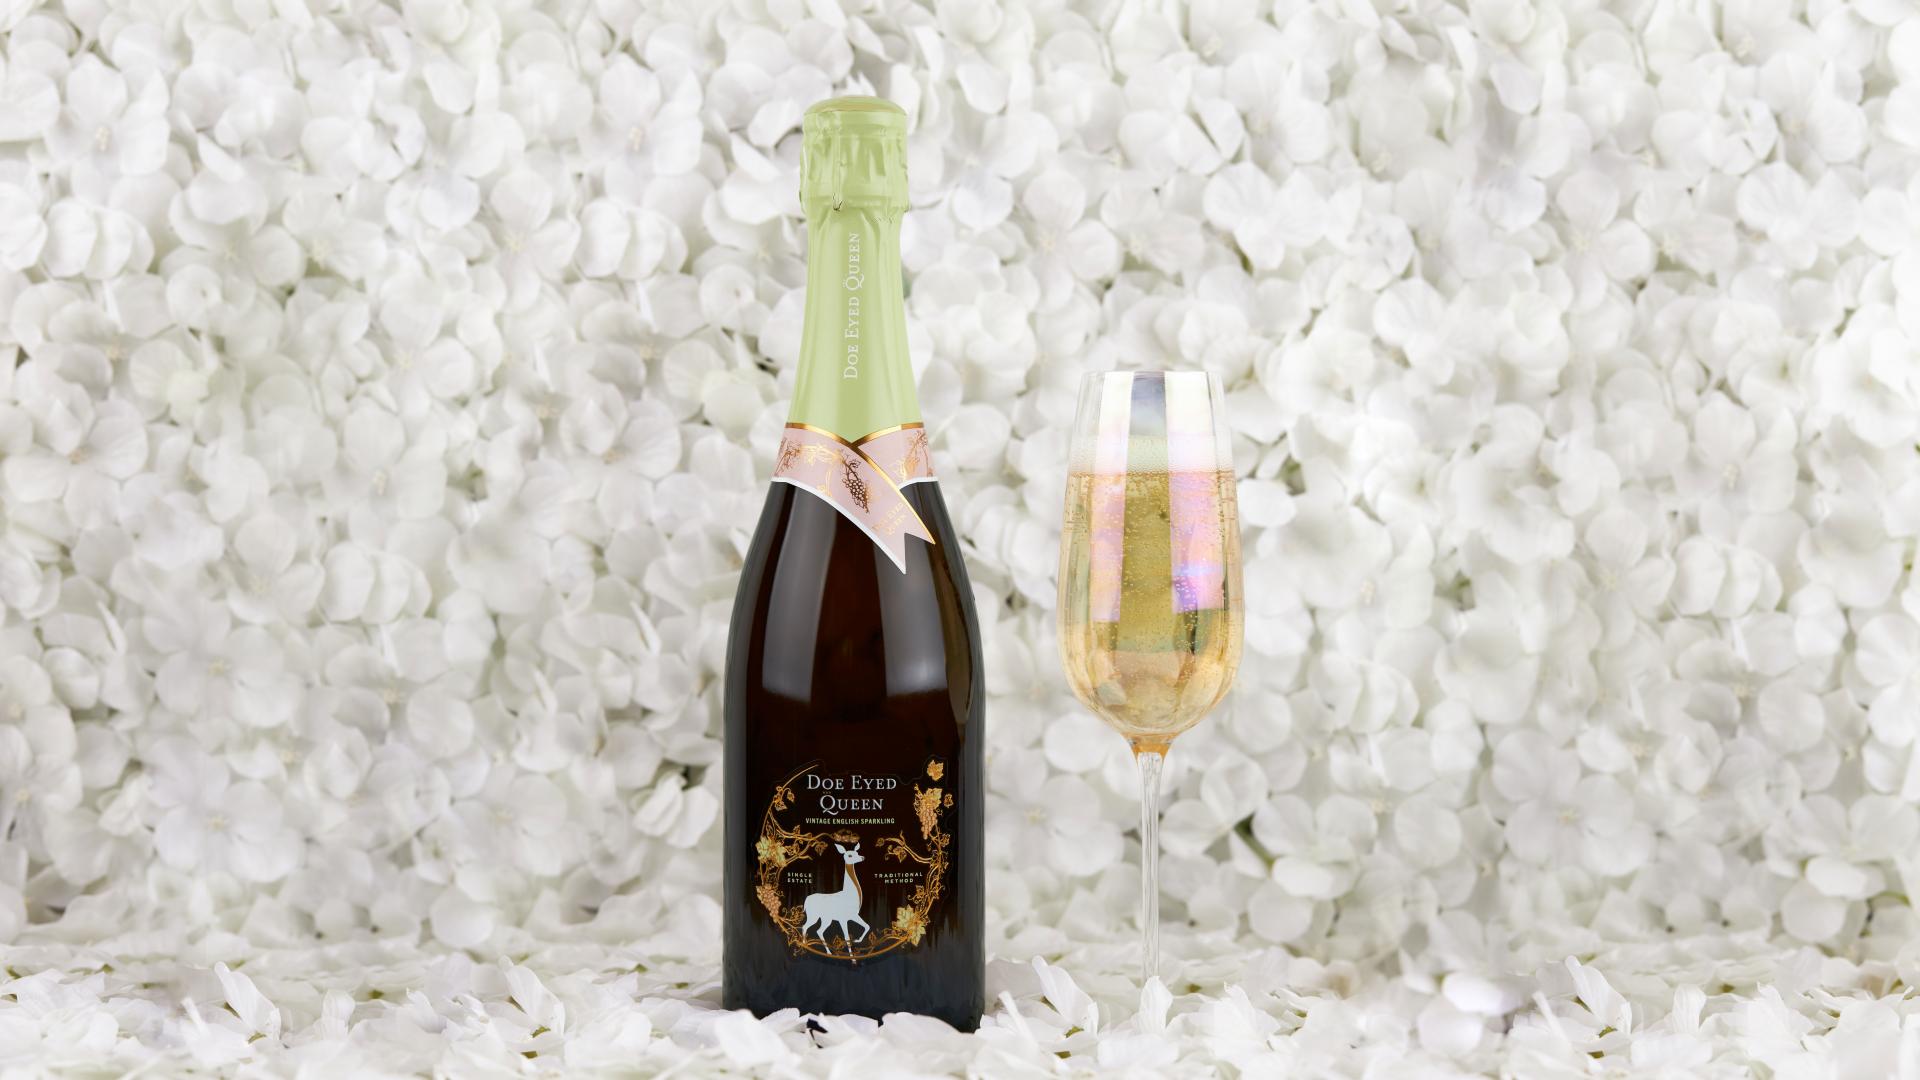 Christmas food and drink gifts 2021 | Doe Eyed Queen Sparkling wine